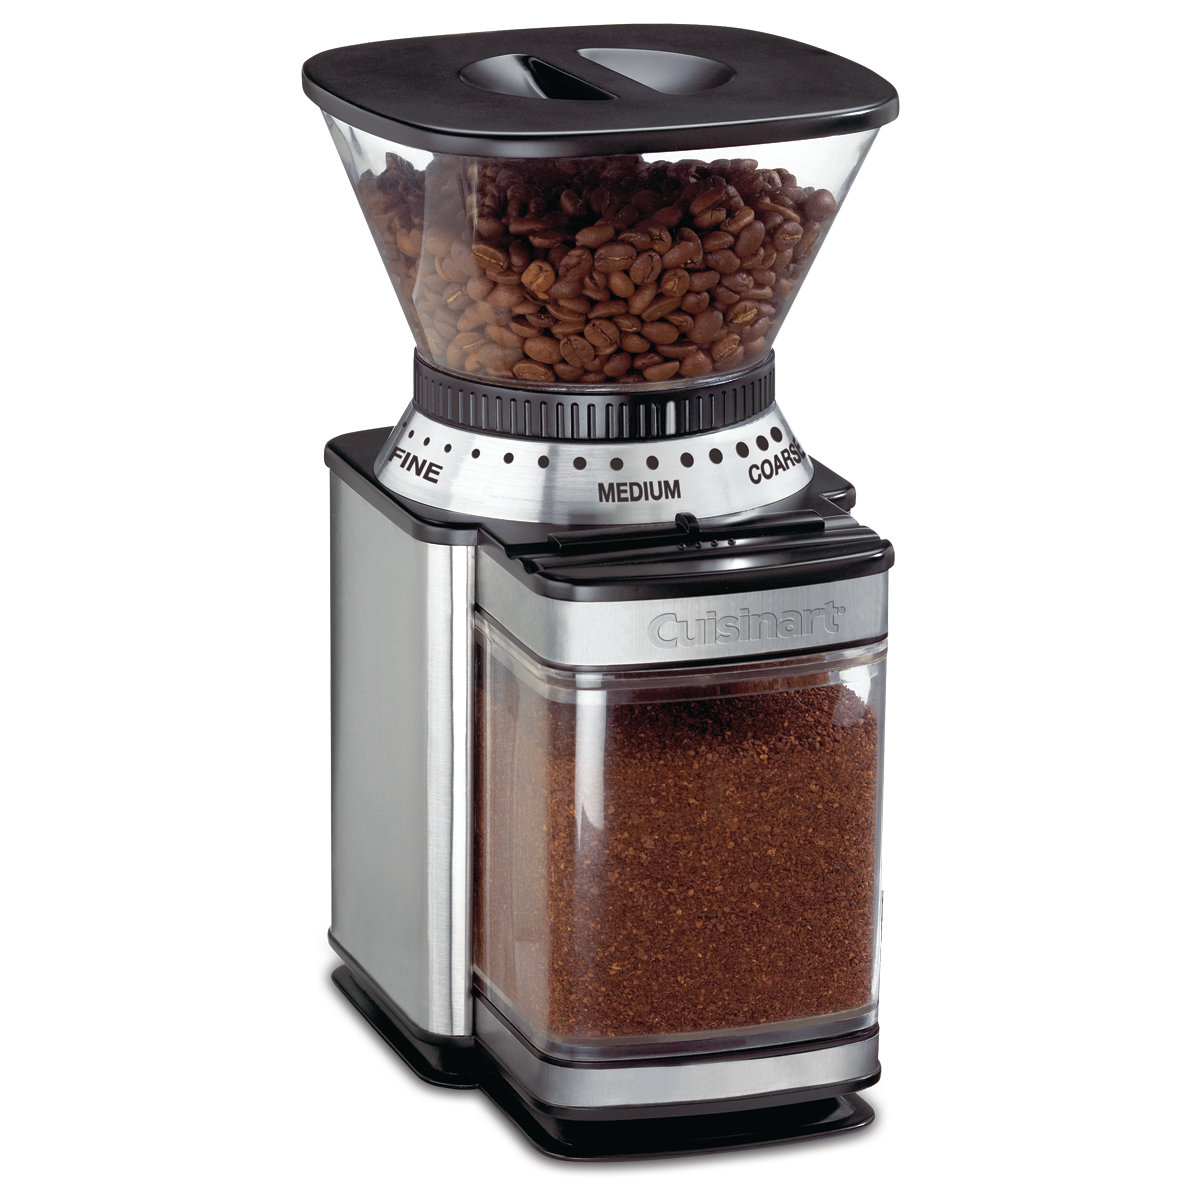 Cuisinart Supreme Grind Automatic Burr Coffee Grinder + Reviews